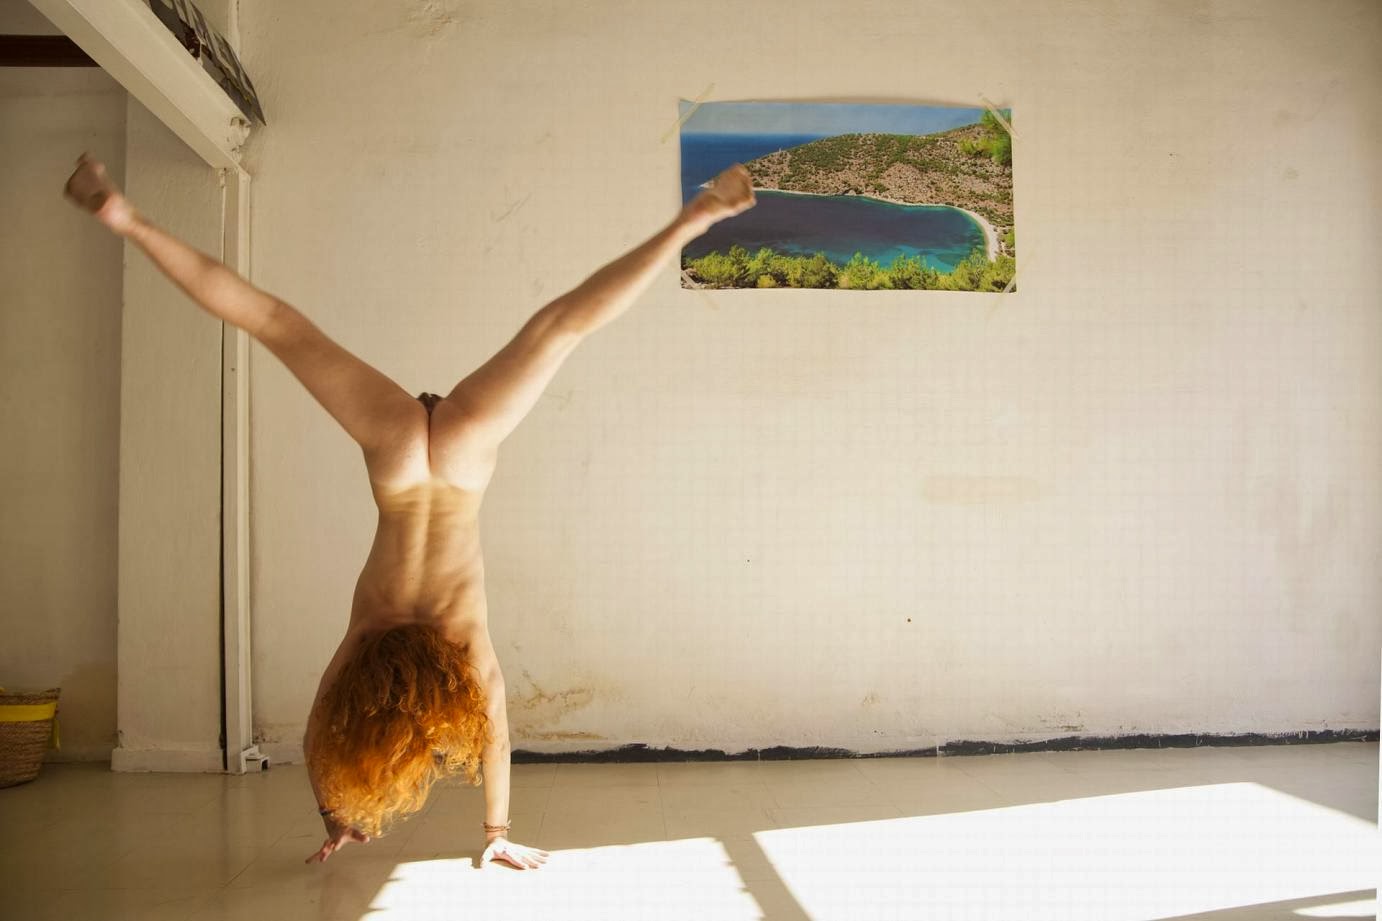 Naughty Nudist Does A Headstand For The Crowd.